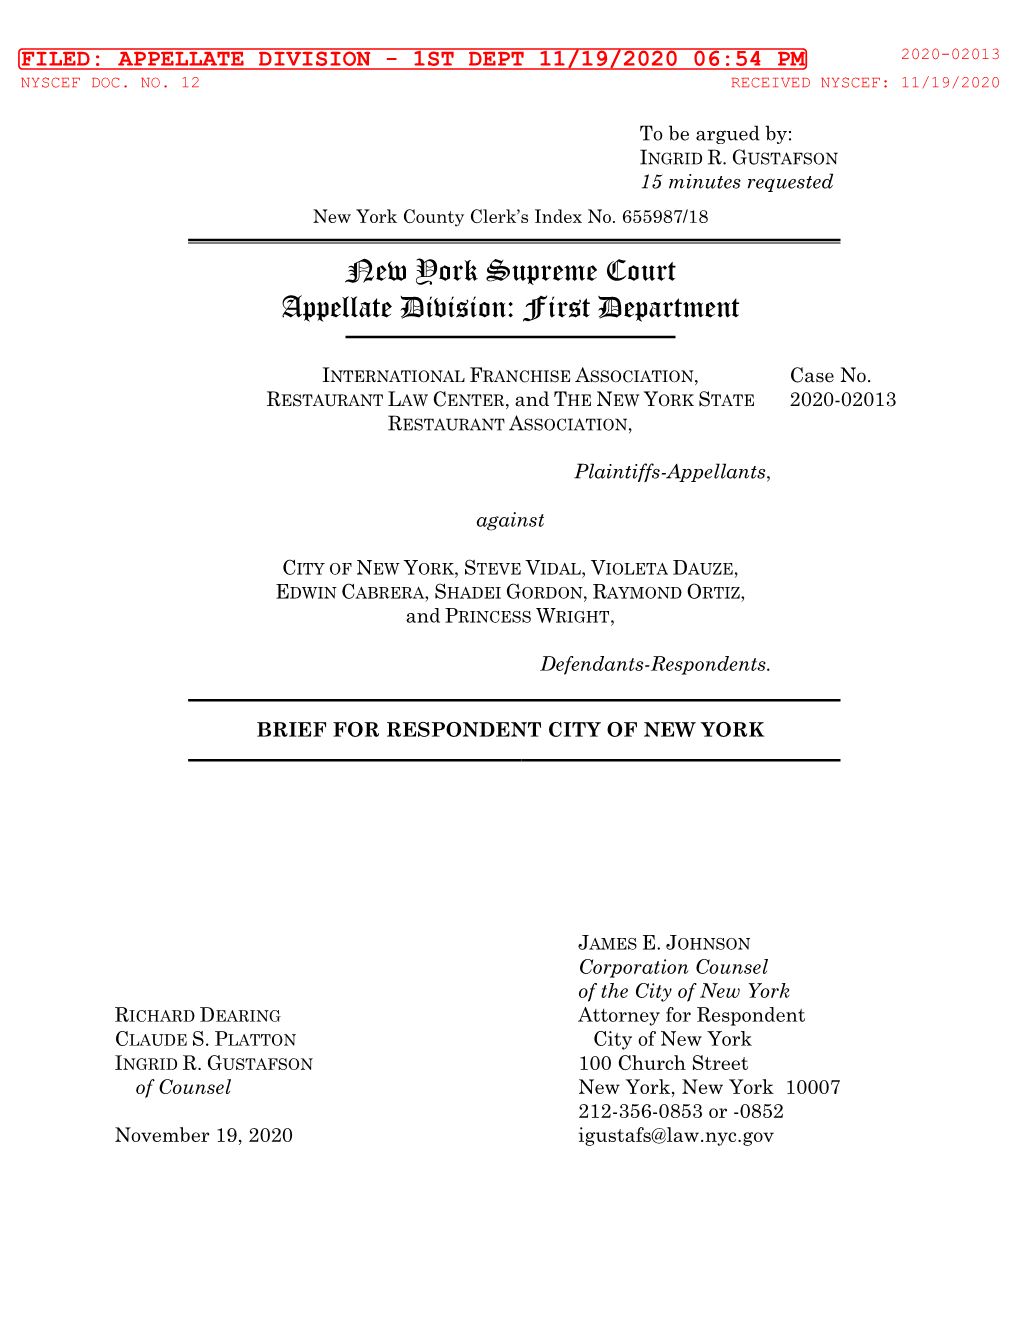 New York Supreme Court Appellate Division: First Department